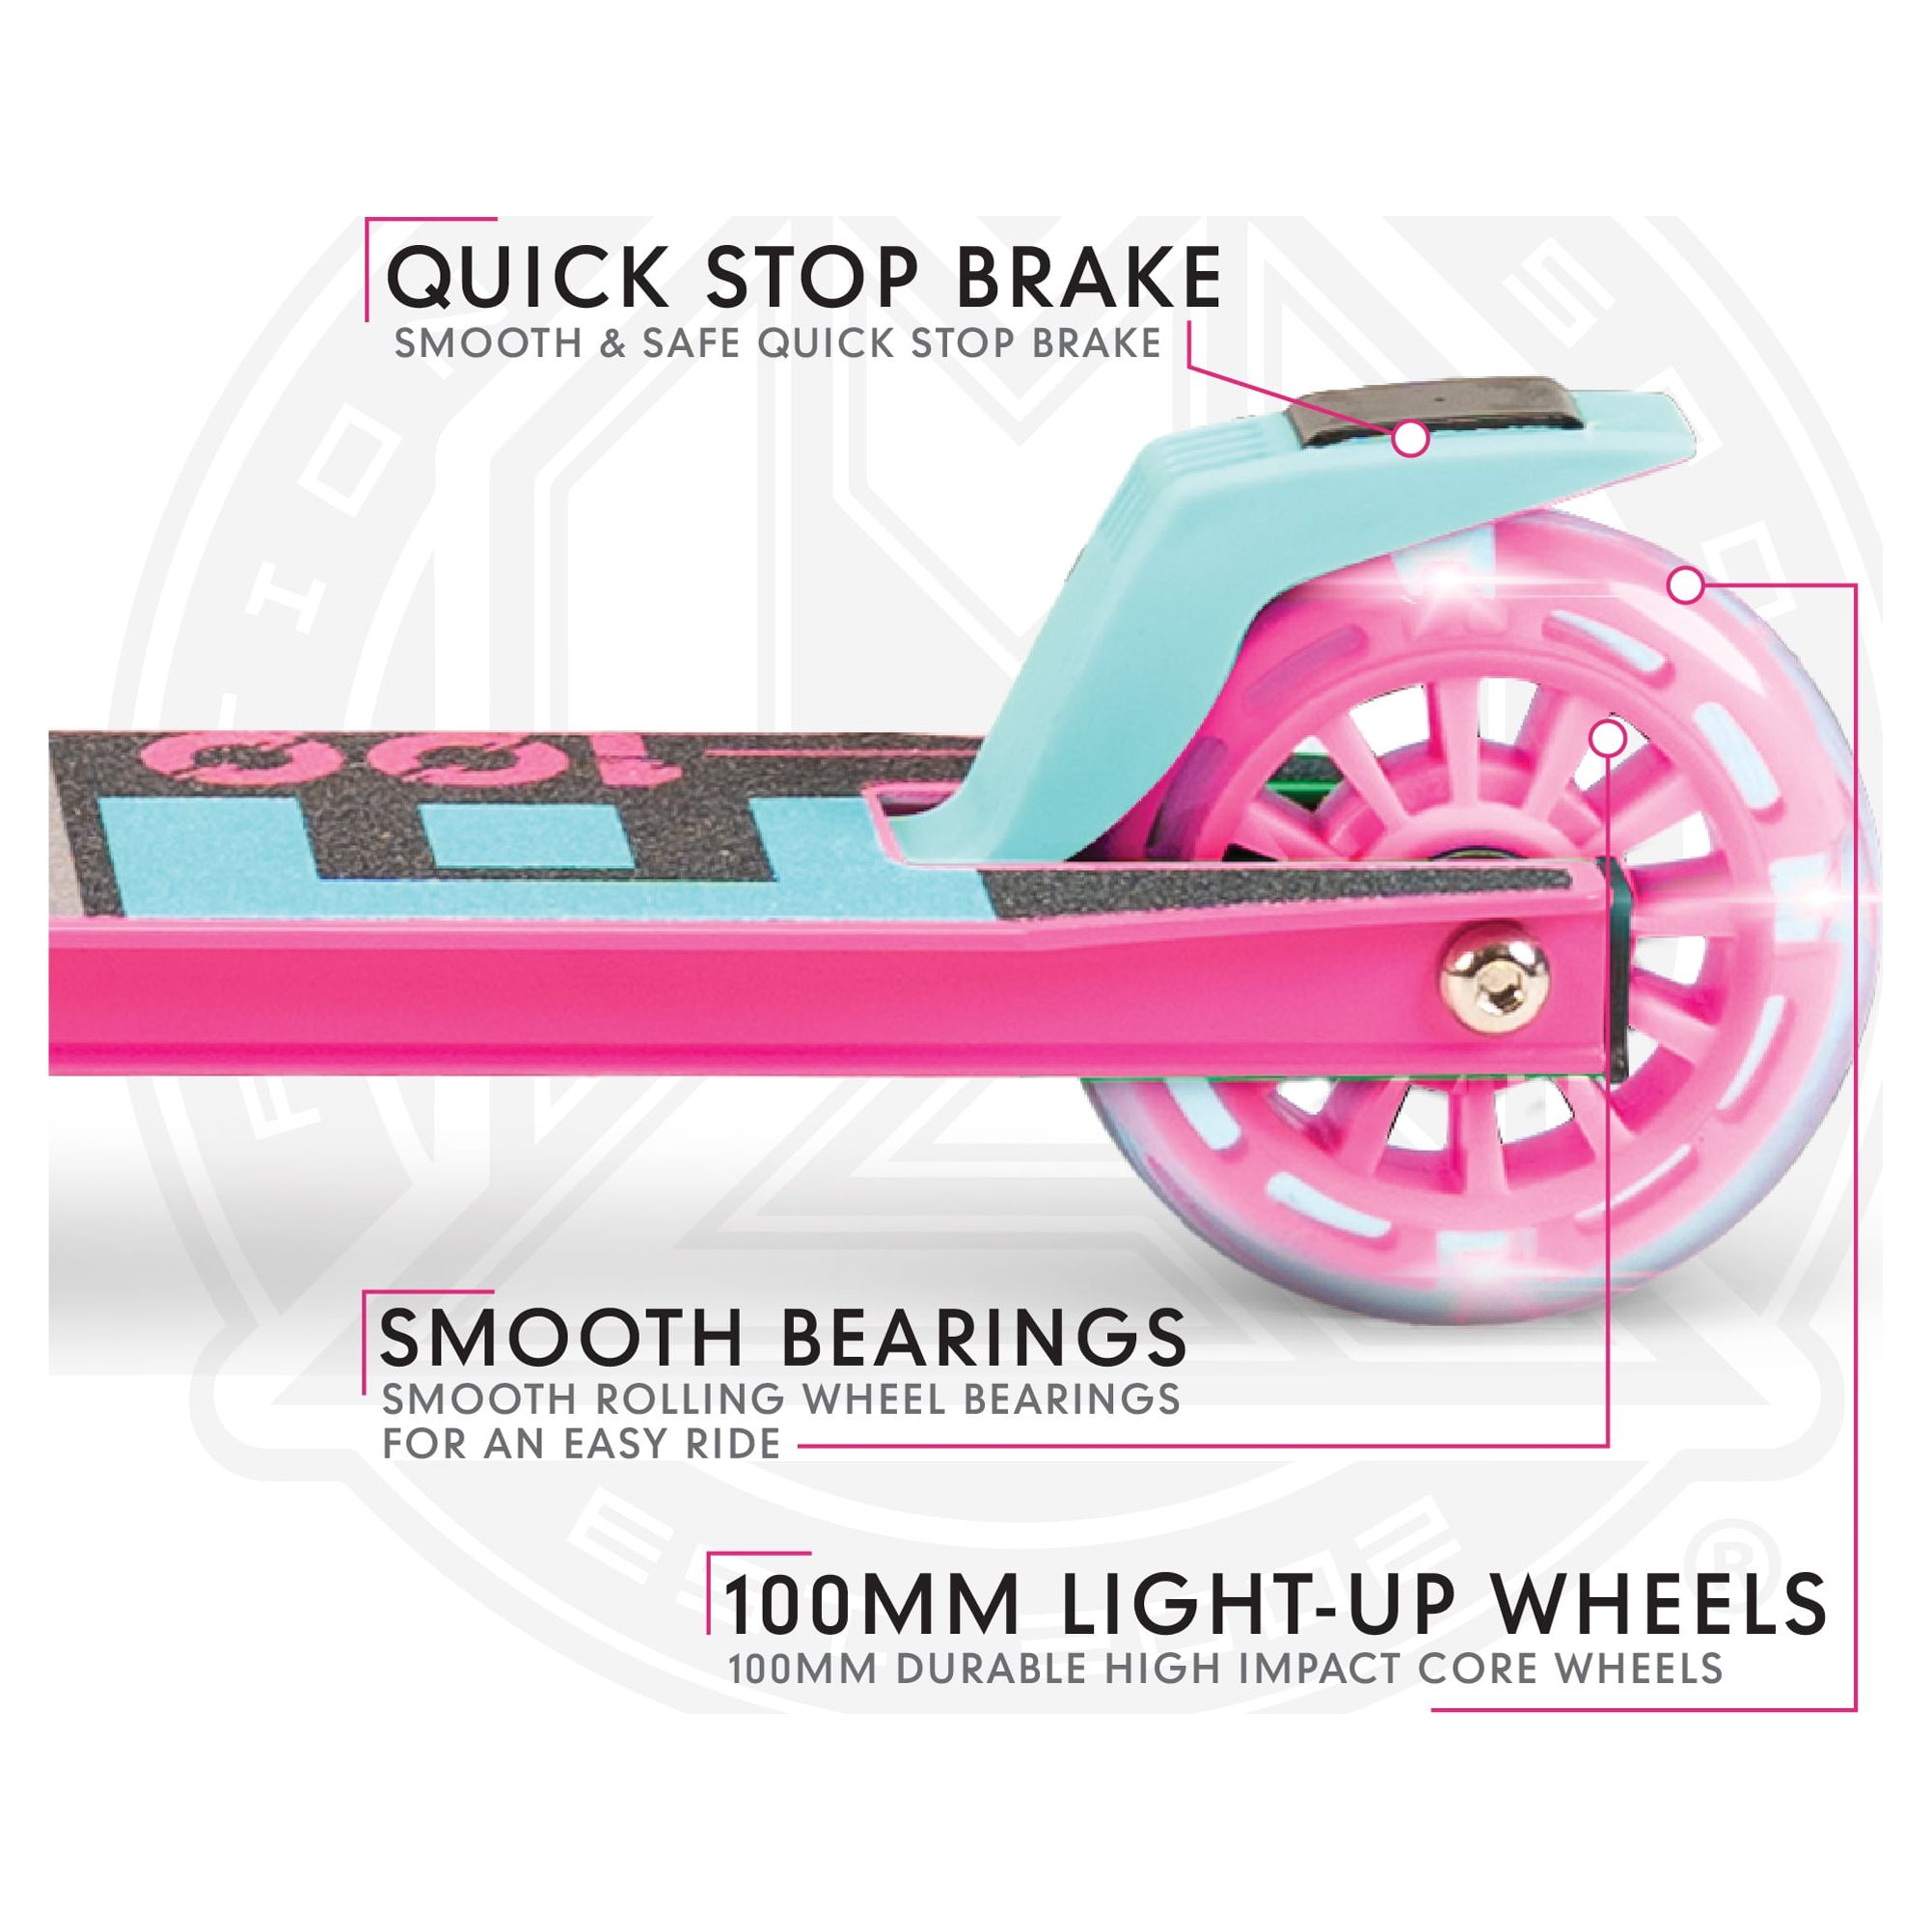 Madd Gear Rize 100 Light-Up Scooter - Pink Teal - image 4 of 16